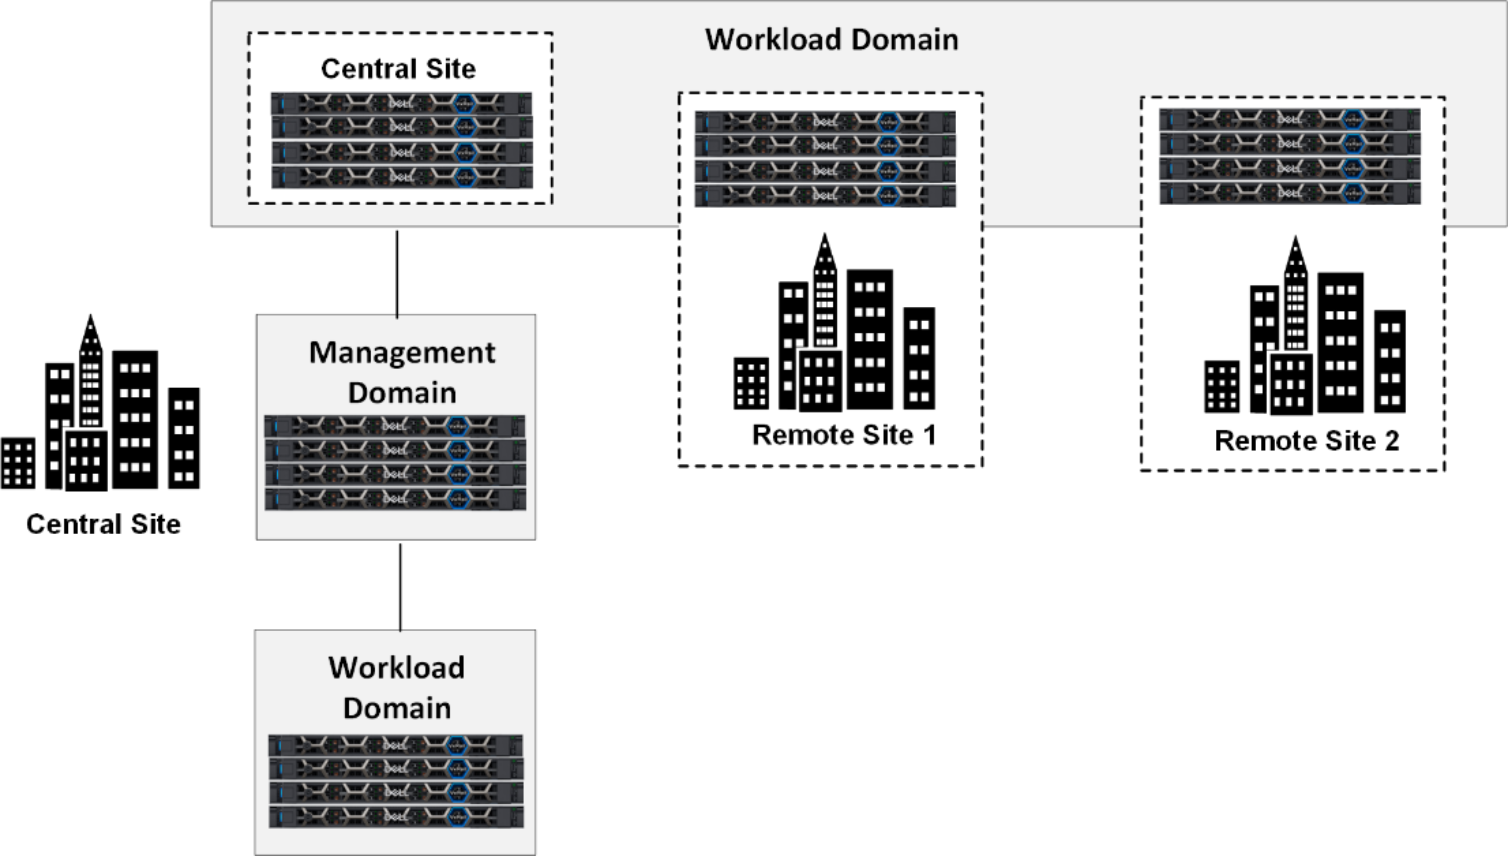 This figure shows a multi-site workload domain.